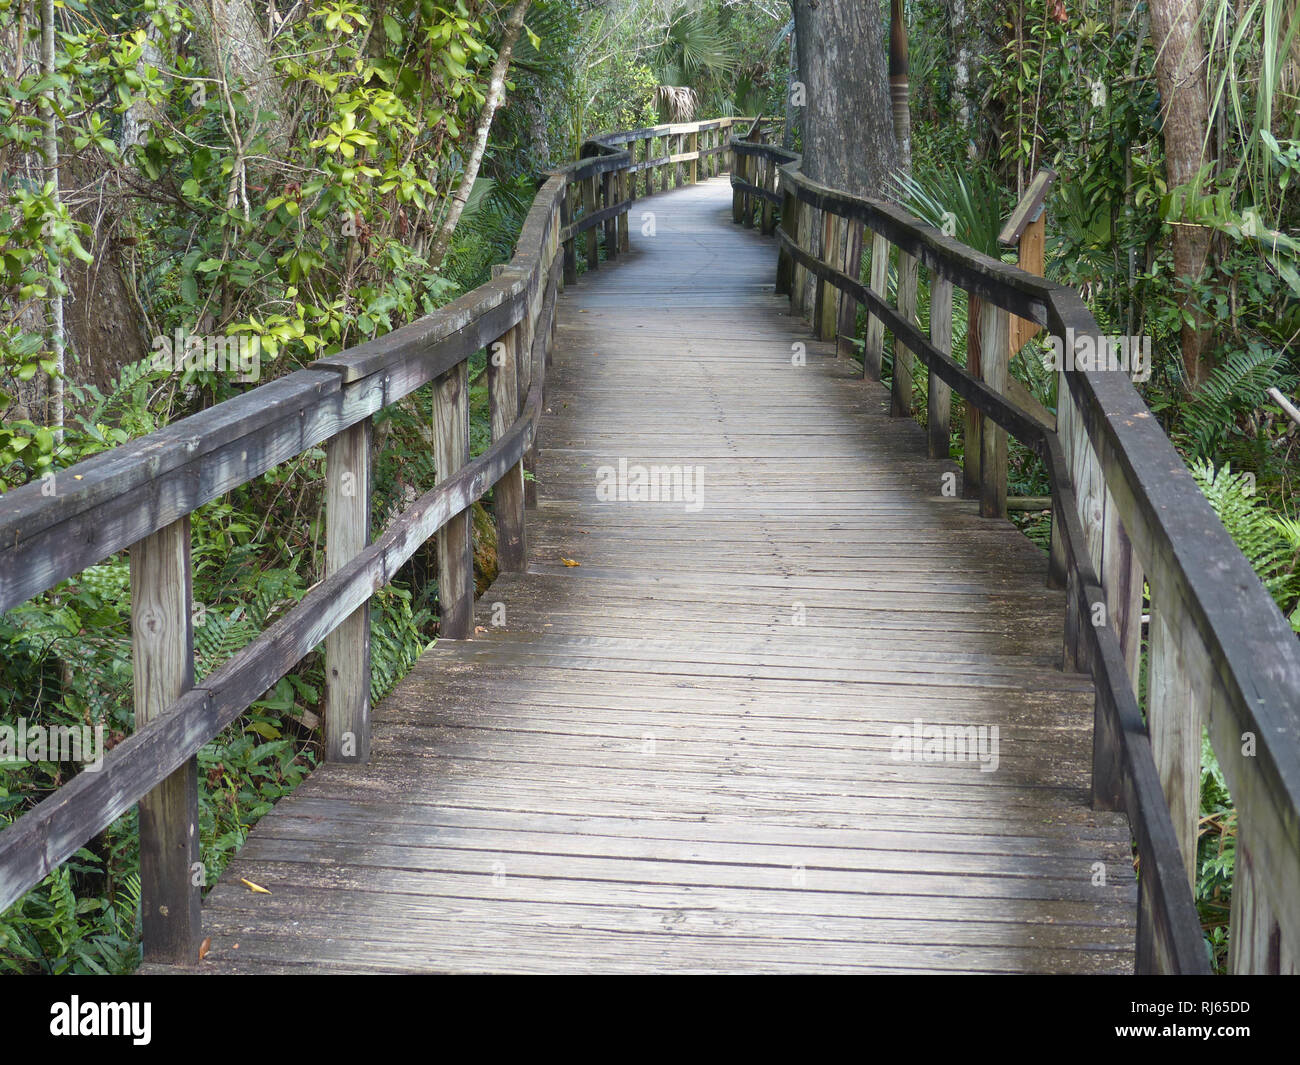 Wooden walkway above Florida swamp for tourist and environmental protection Stock Photo